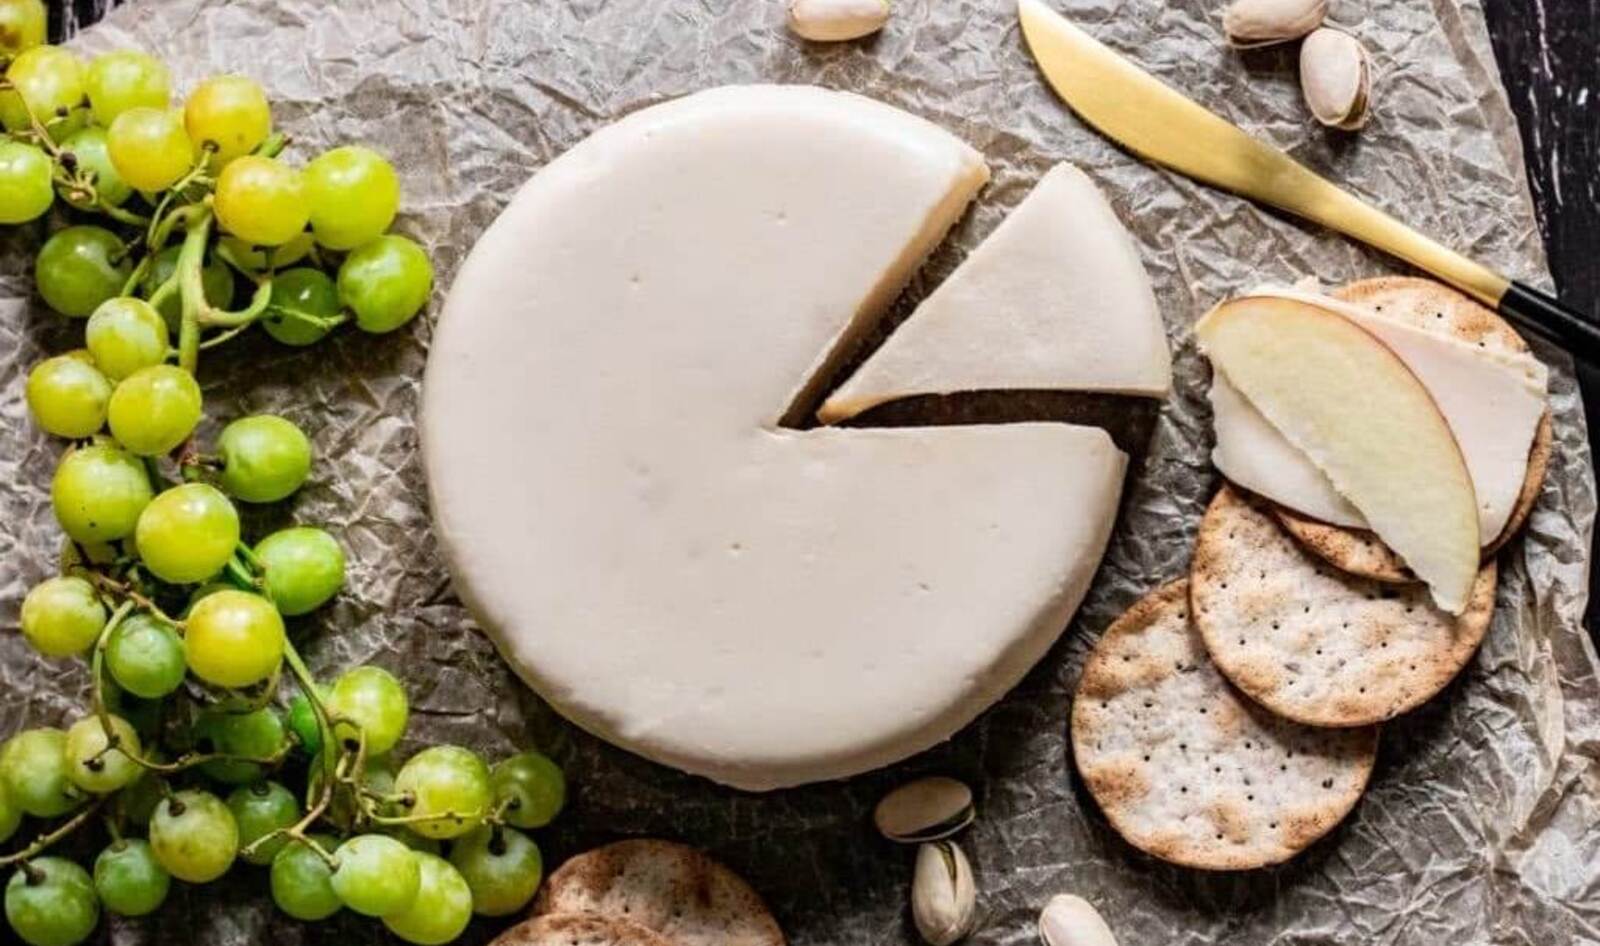 5 Easy Tips to Make Nut-Free Vegan Cheese at Home